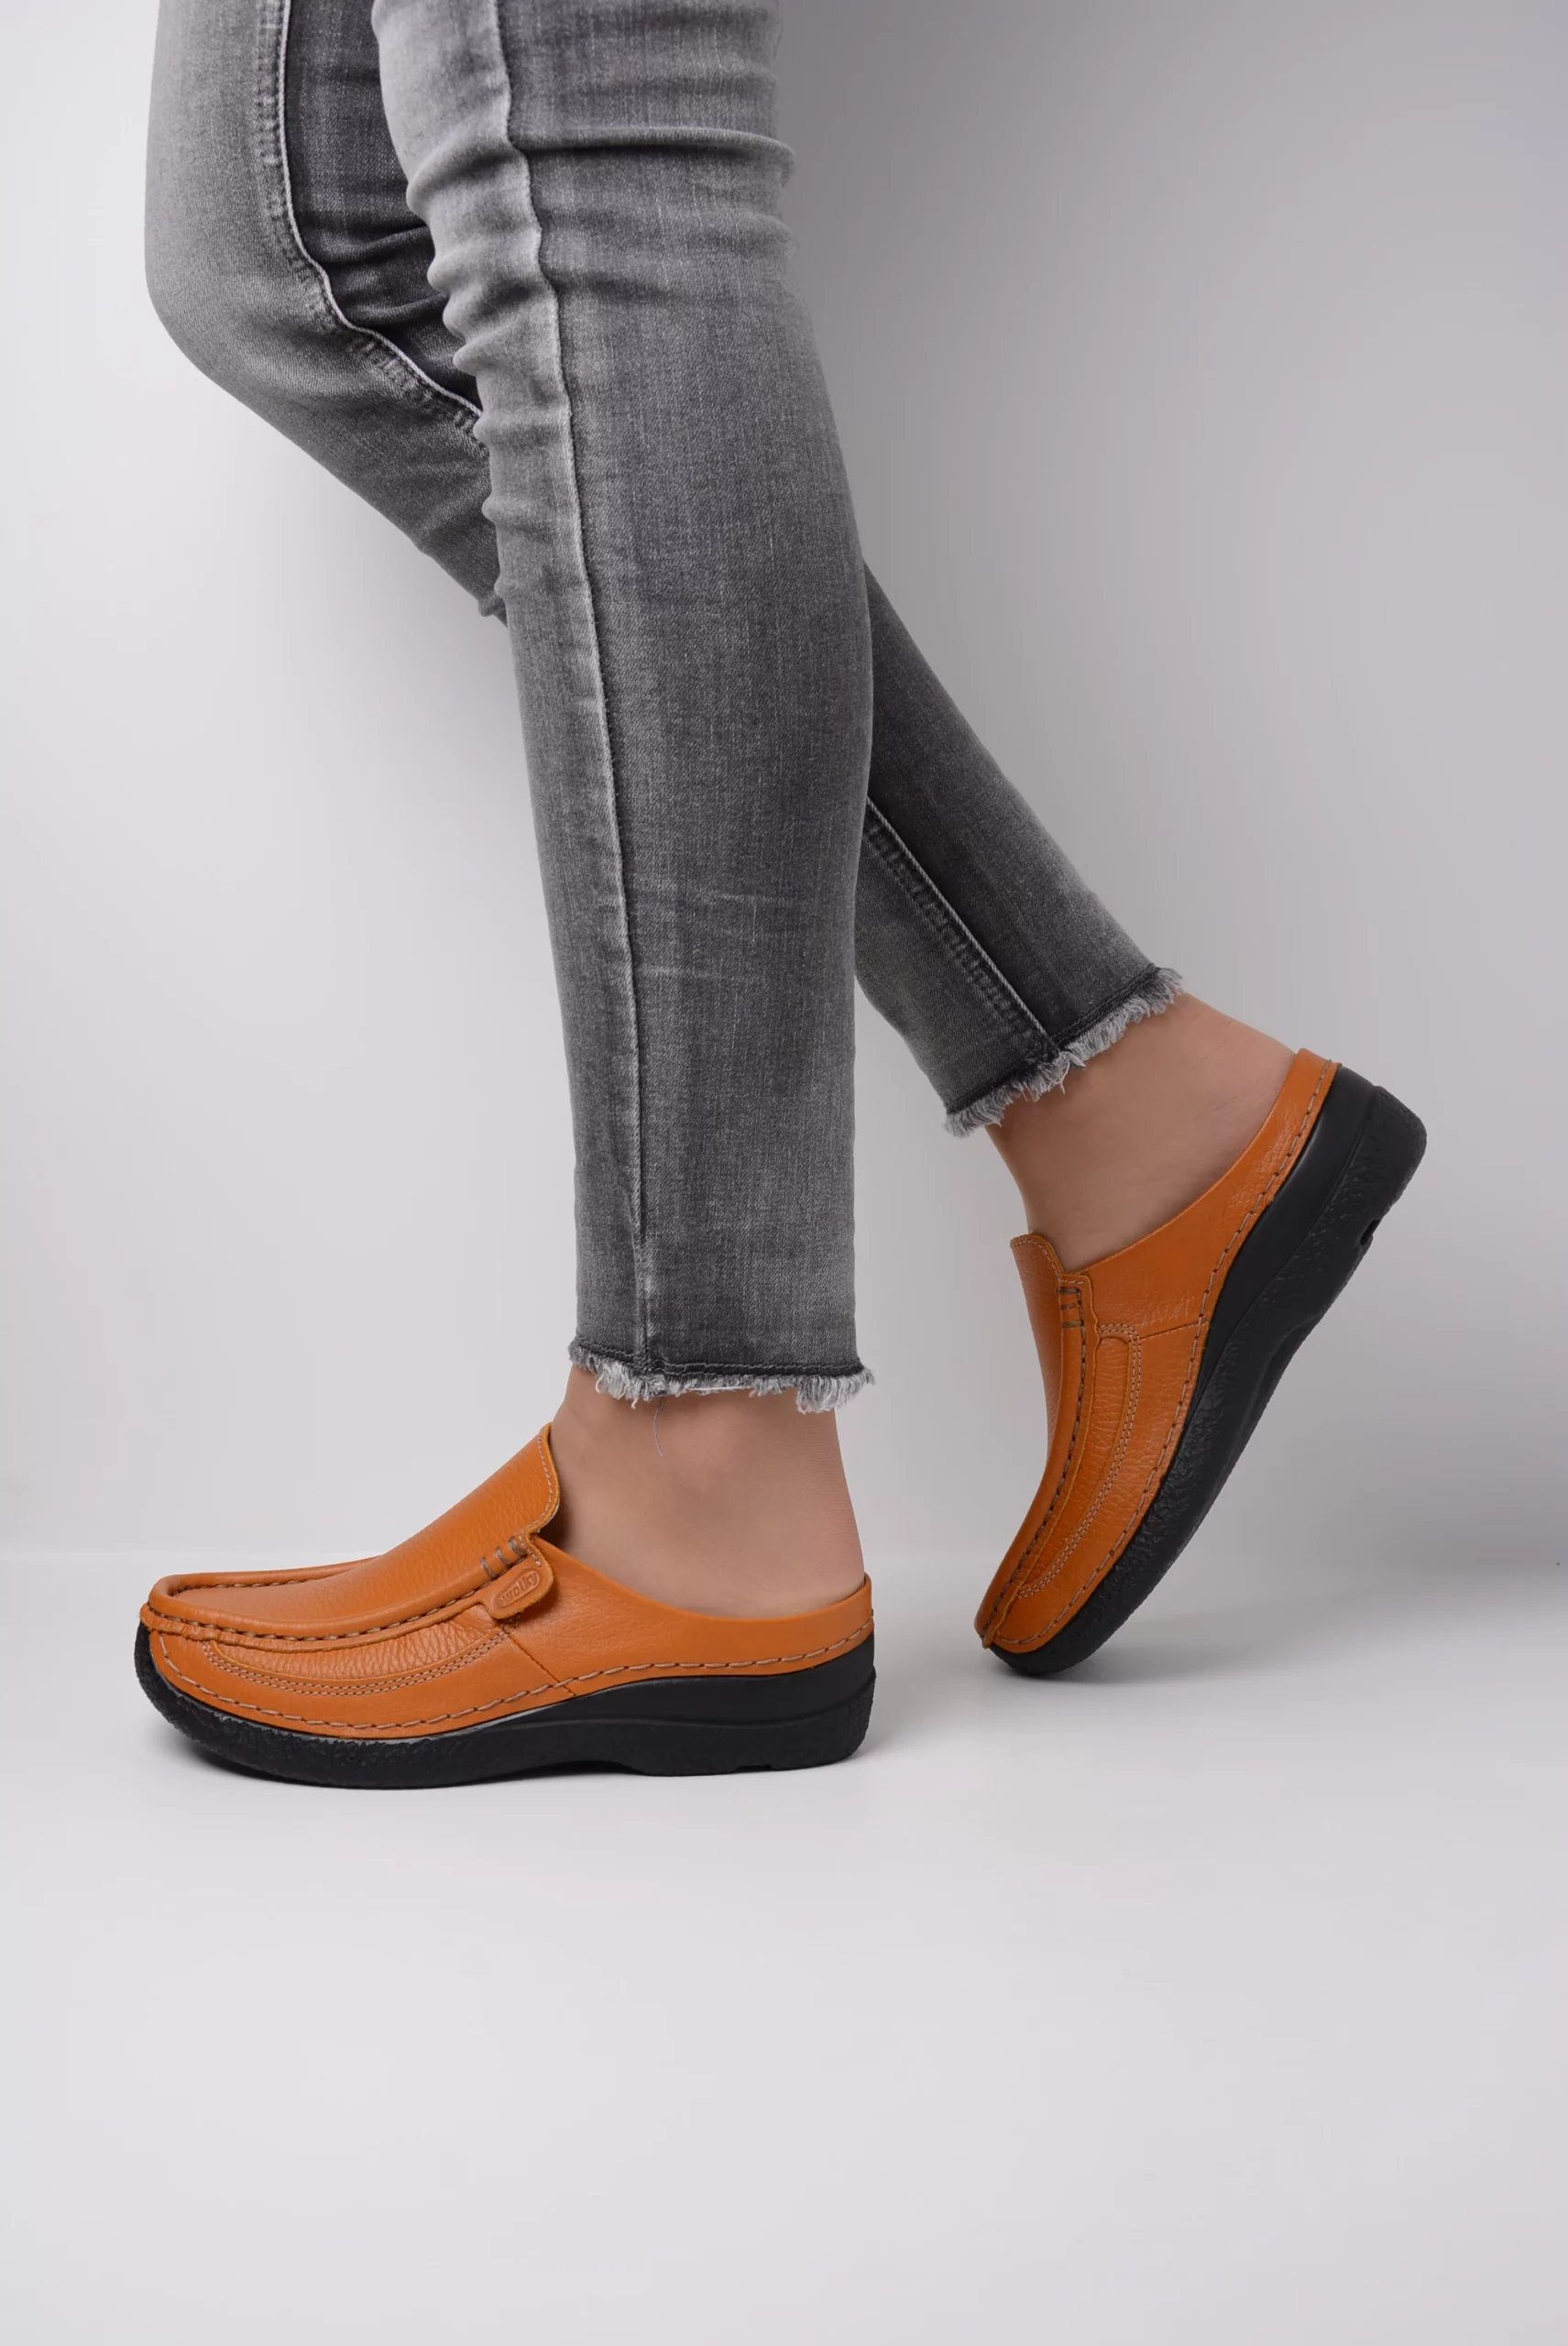 Conventie Vrijgekomen Kers Buy your Wolky Roll Slide - ochre leather shoes online - Wolky